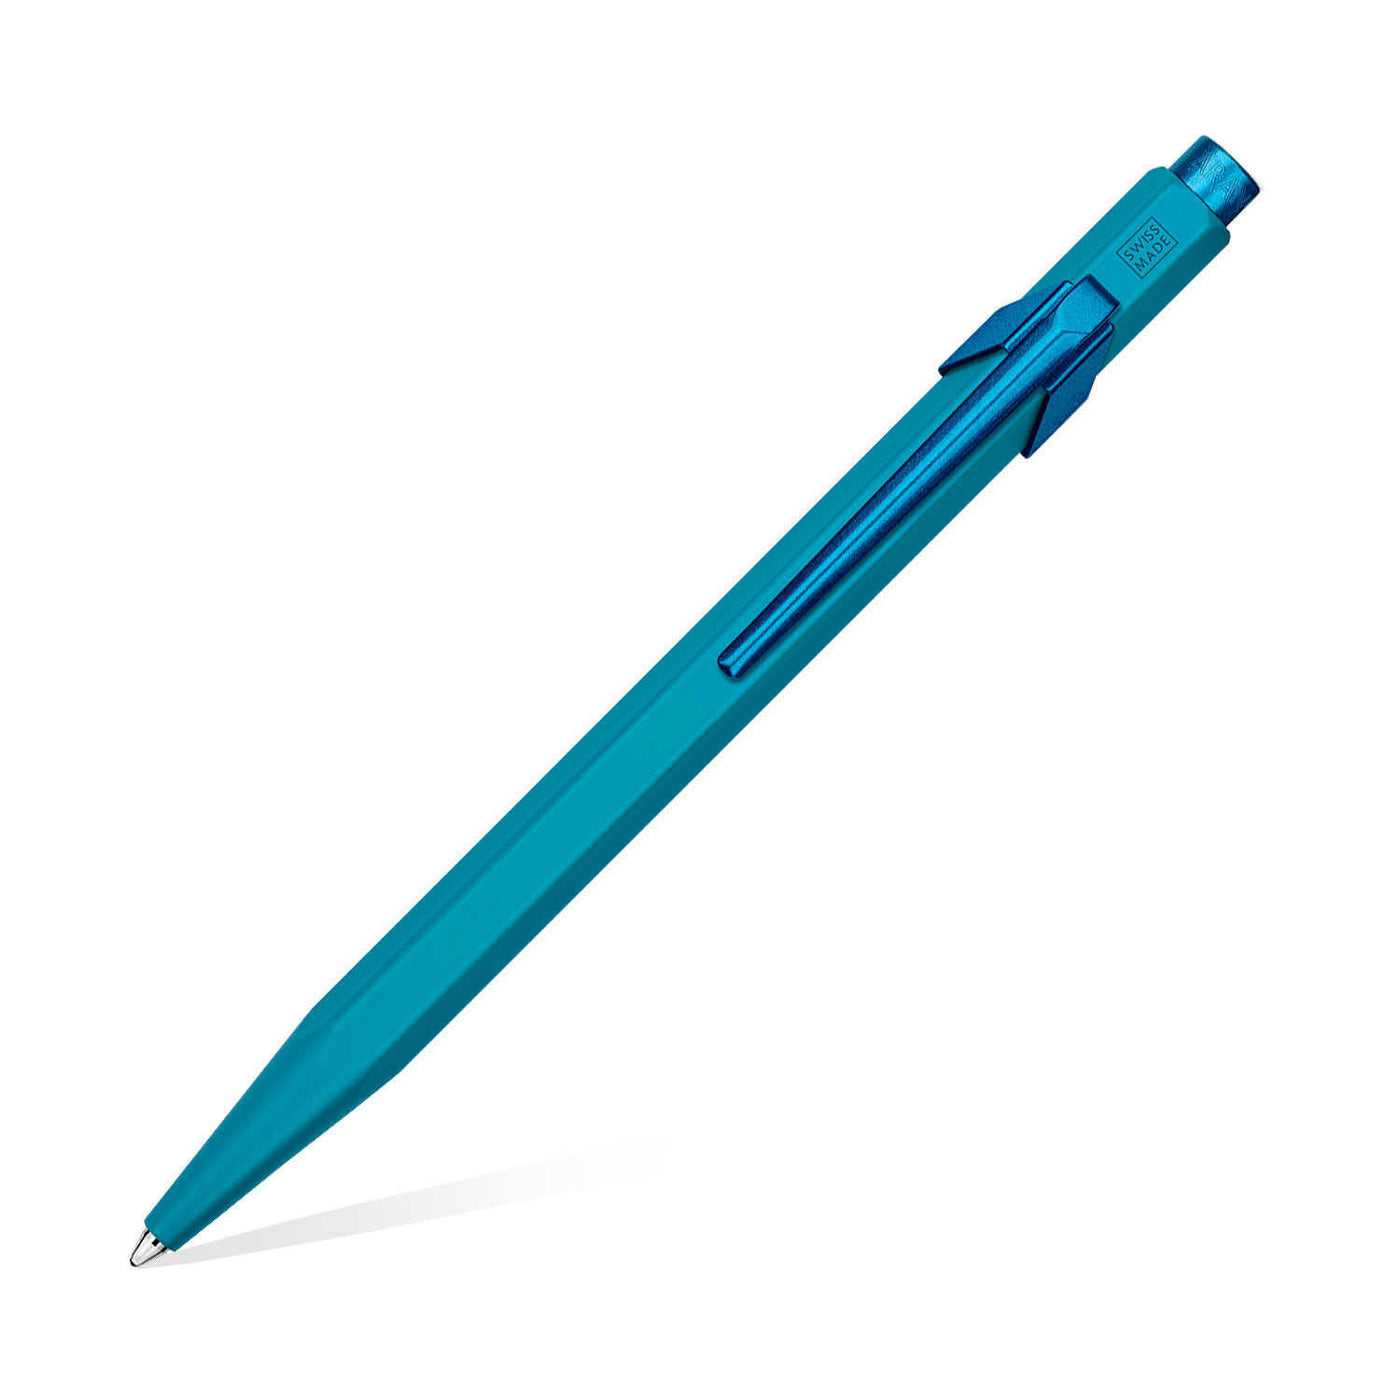 Caran d'Ache 849 Claim Your Style Ball Pen - Ice Blue (Limited Edition) 1